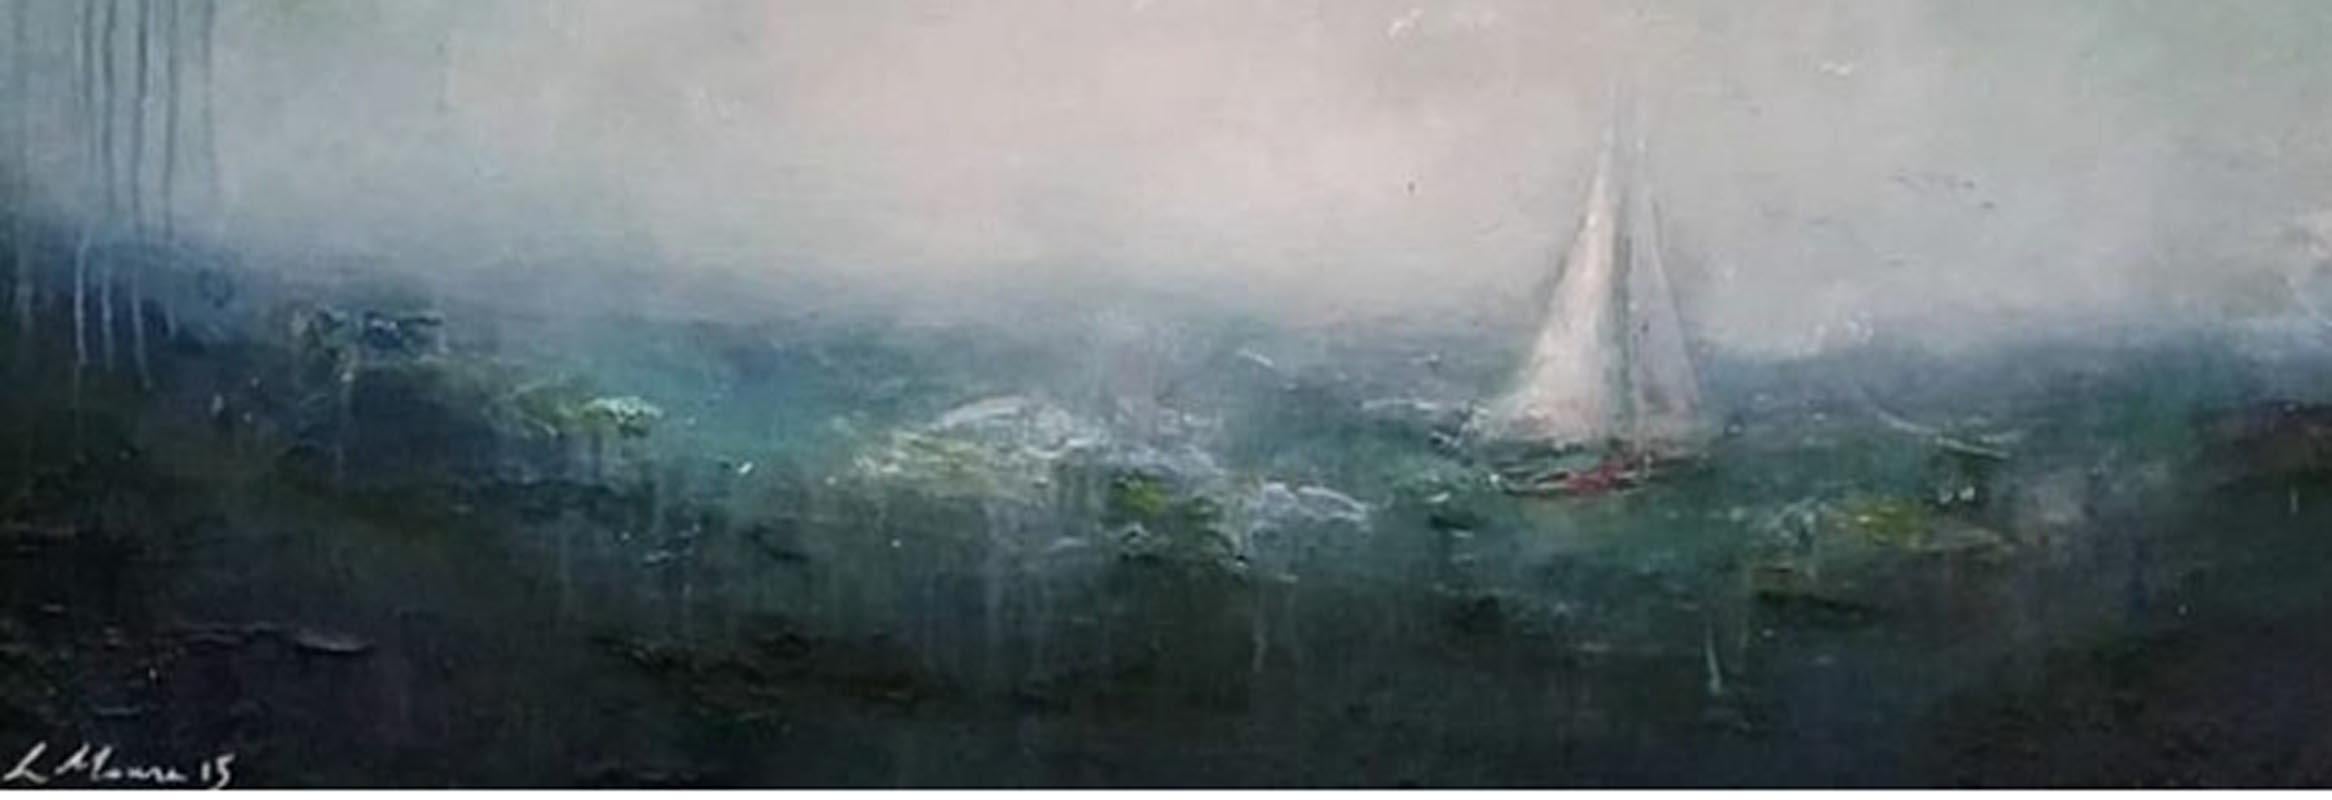 Emerald Sail, Contemporary Seascape Painting (Grau), Abstract Painting, von Lisa House